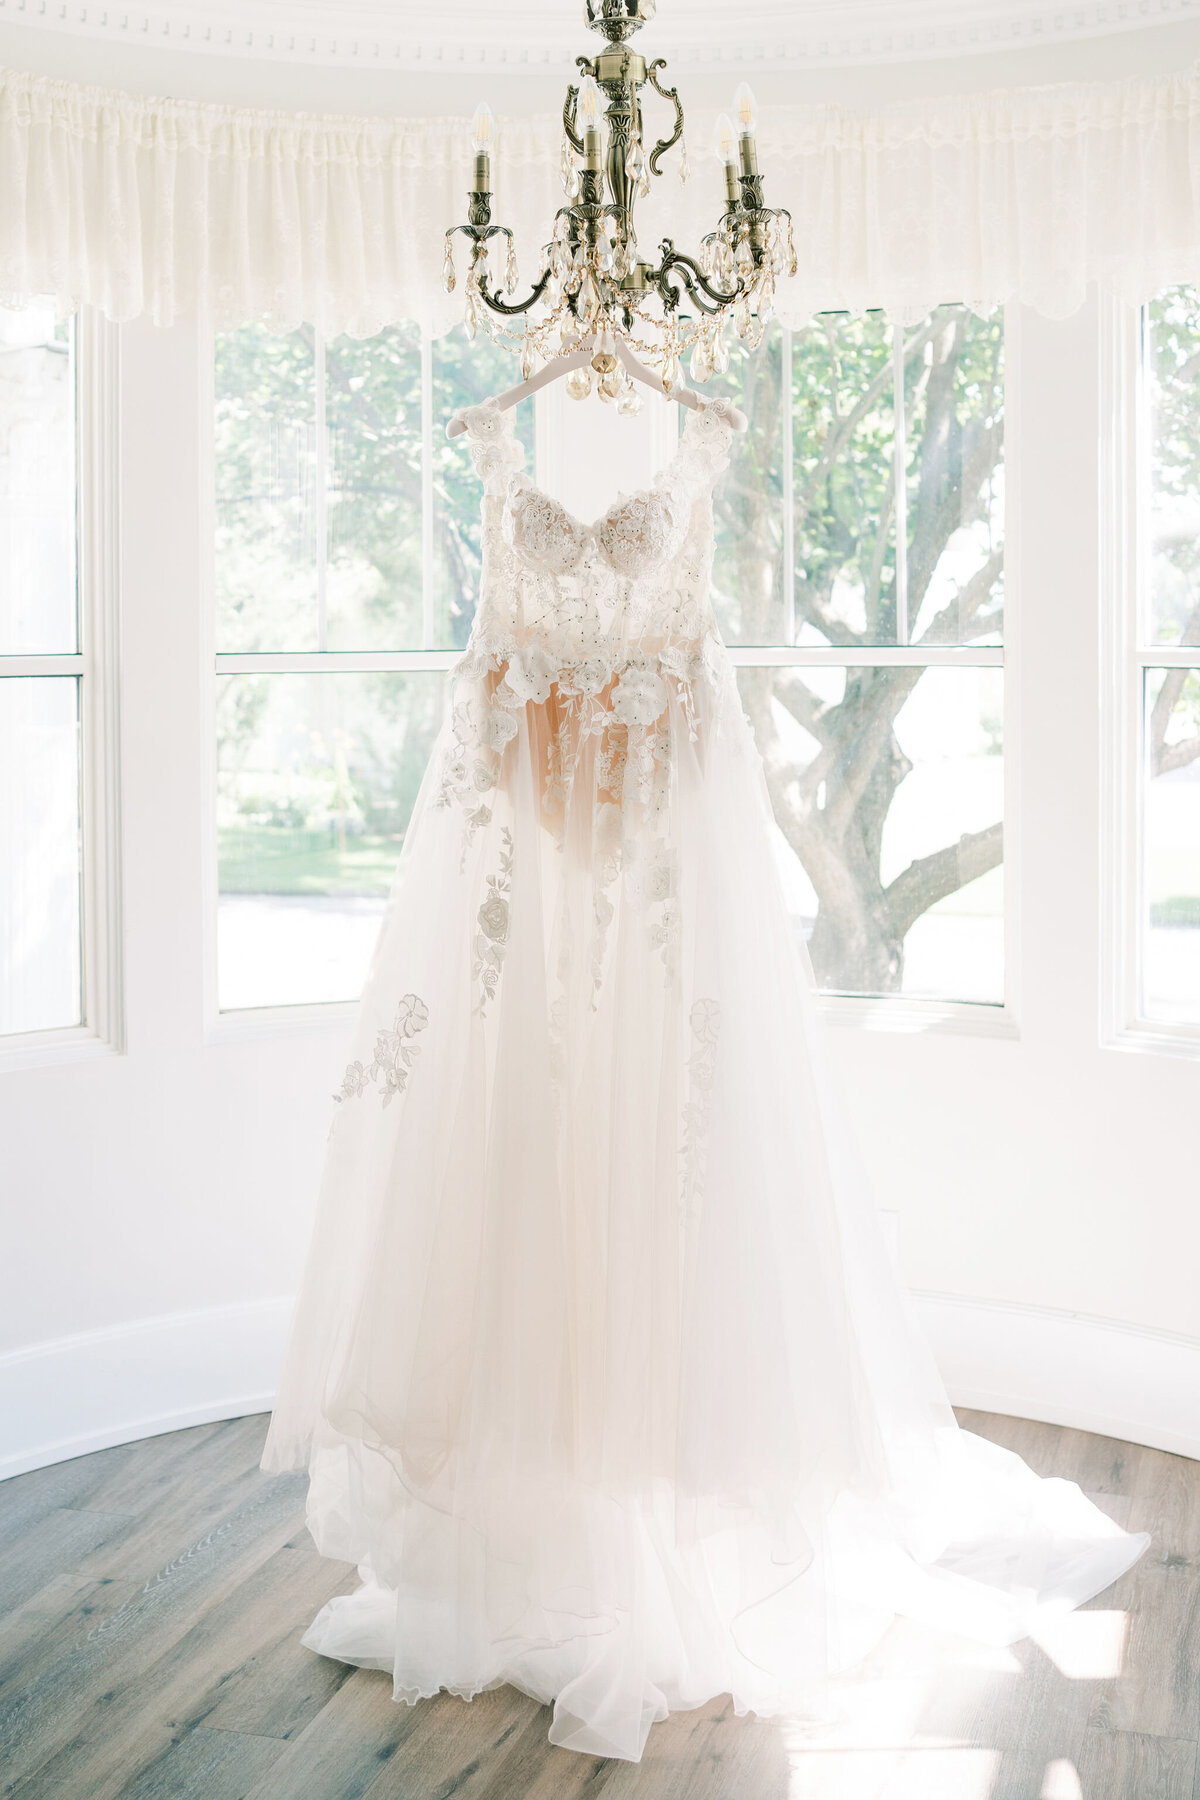 A lace and tulle wedding dress hangs from a chandelier in front of large windows with sheer curtains, illuminated by natural light, showcasing the impeccable wedding design for the upcoming wedding in Canada.